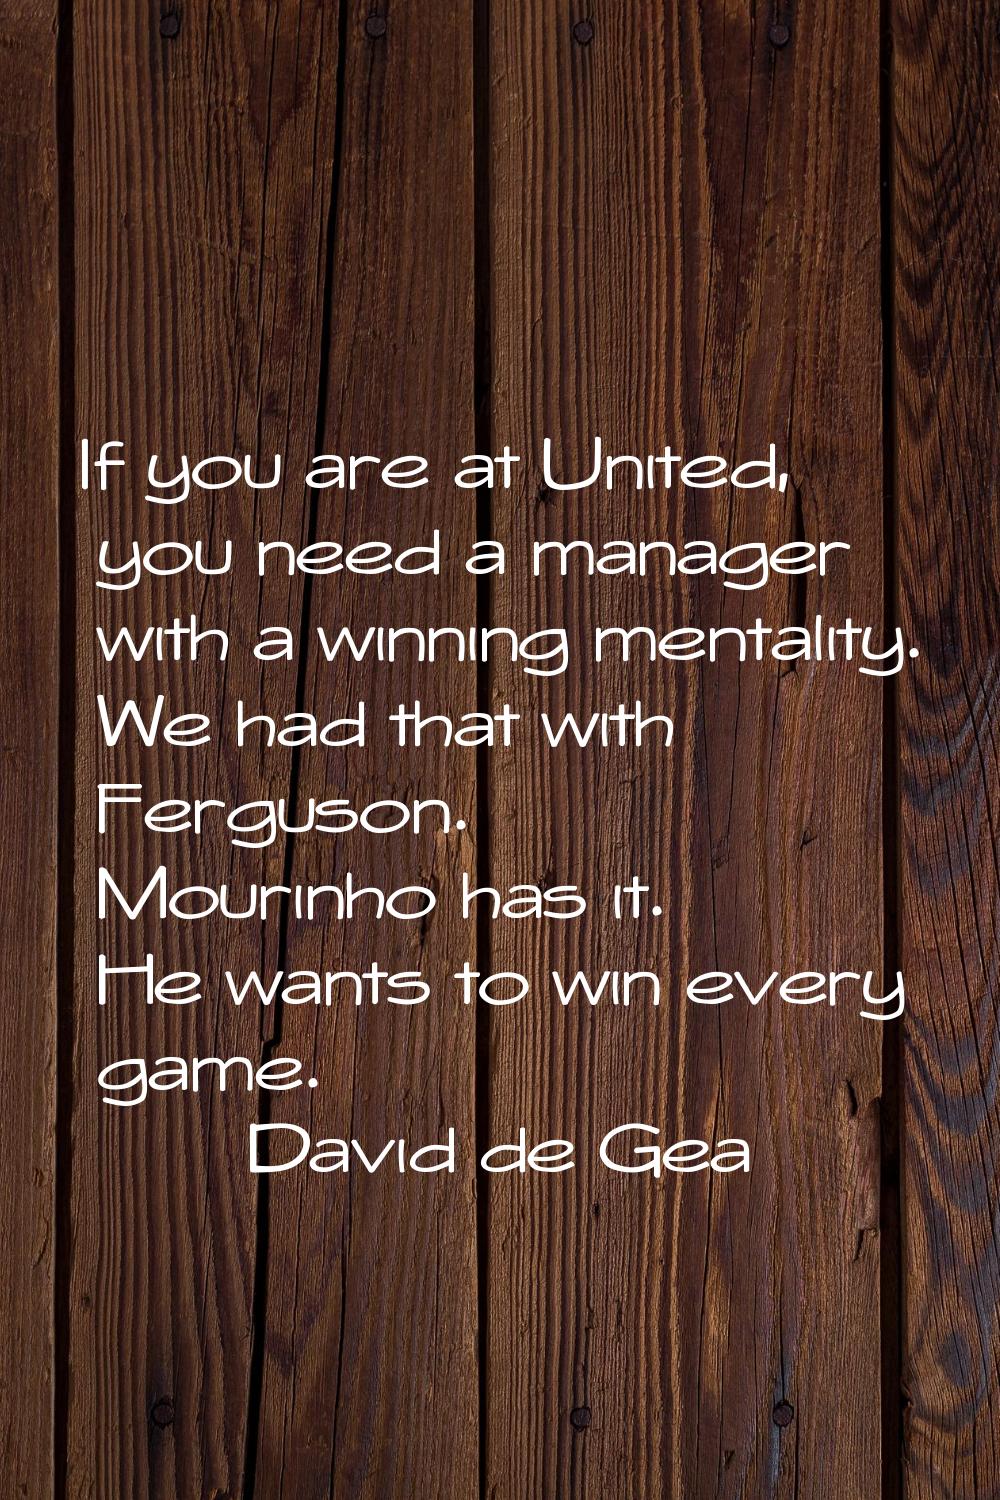 If you are at United, you need a manager with a winning mentality. We had that with Ferguson. Mouri